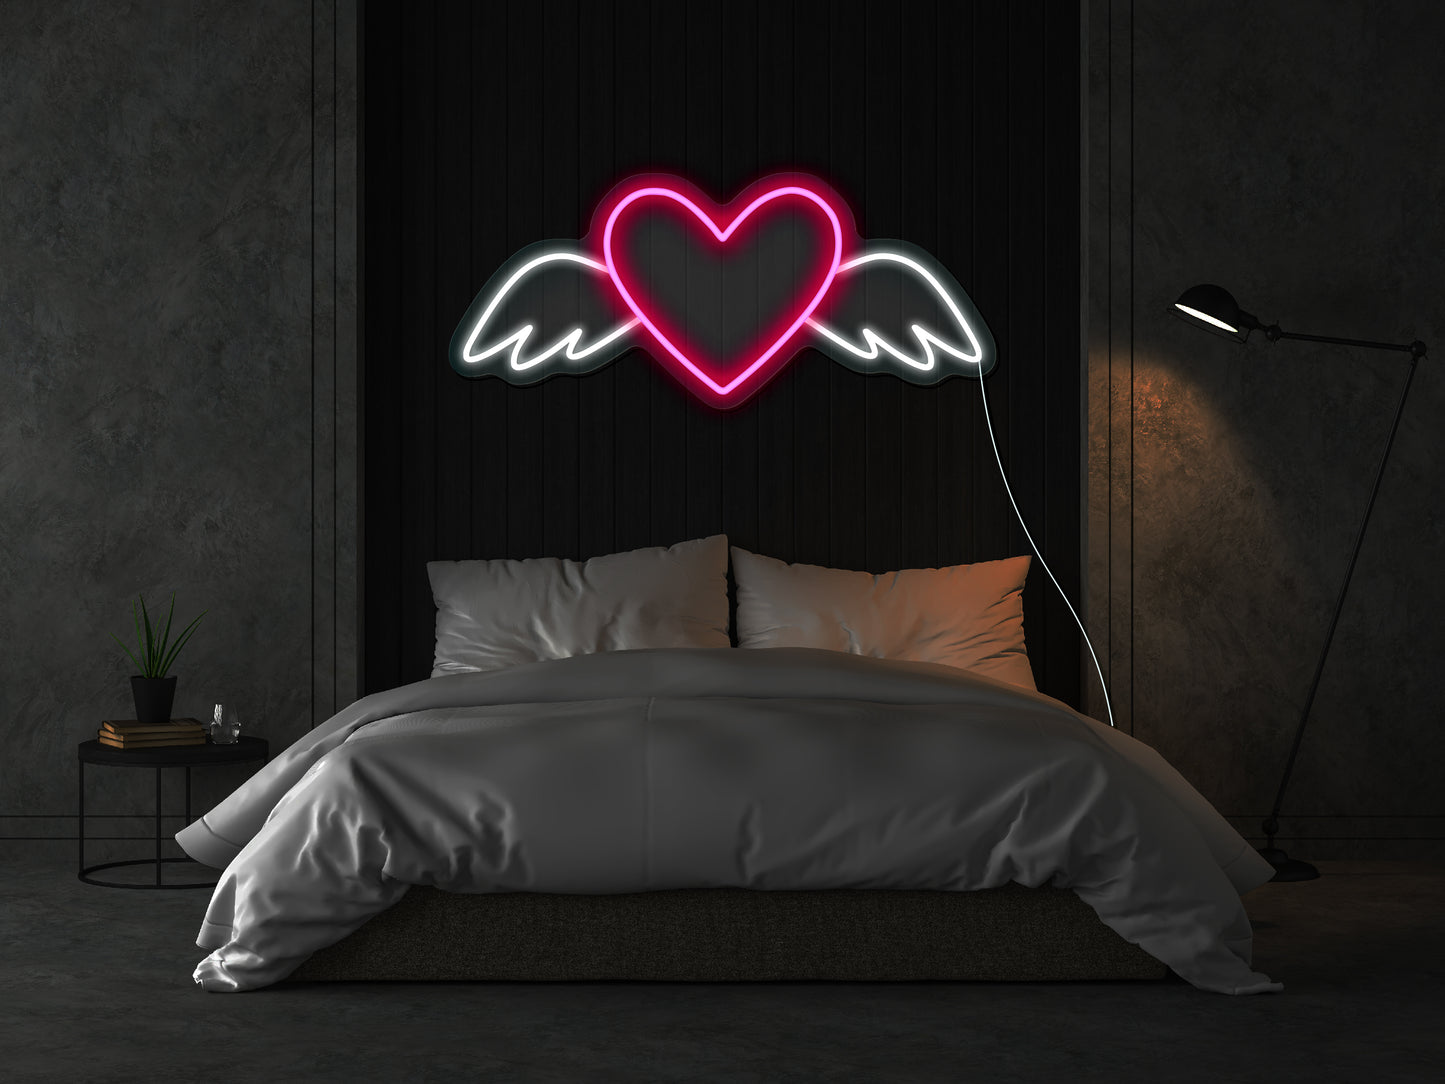 A pink neon sign of a heart with wings, illuminating a dimly lit room, perfect for romantic or love-themed decoration